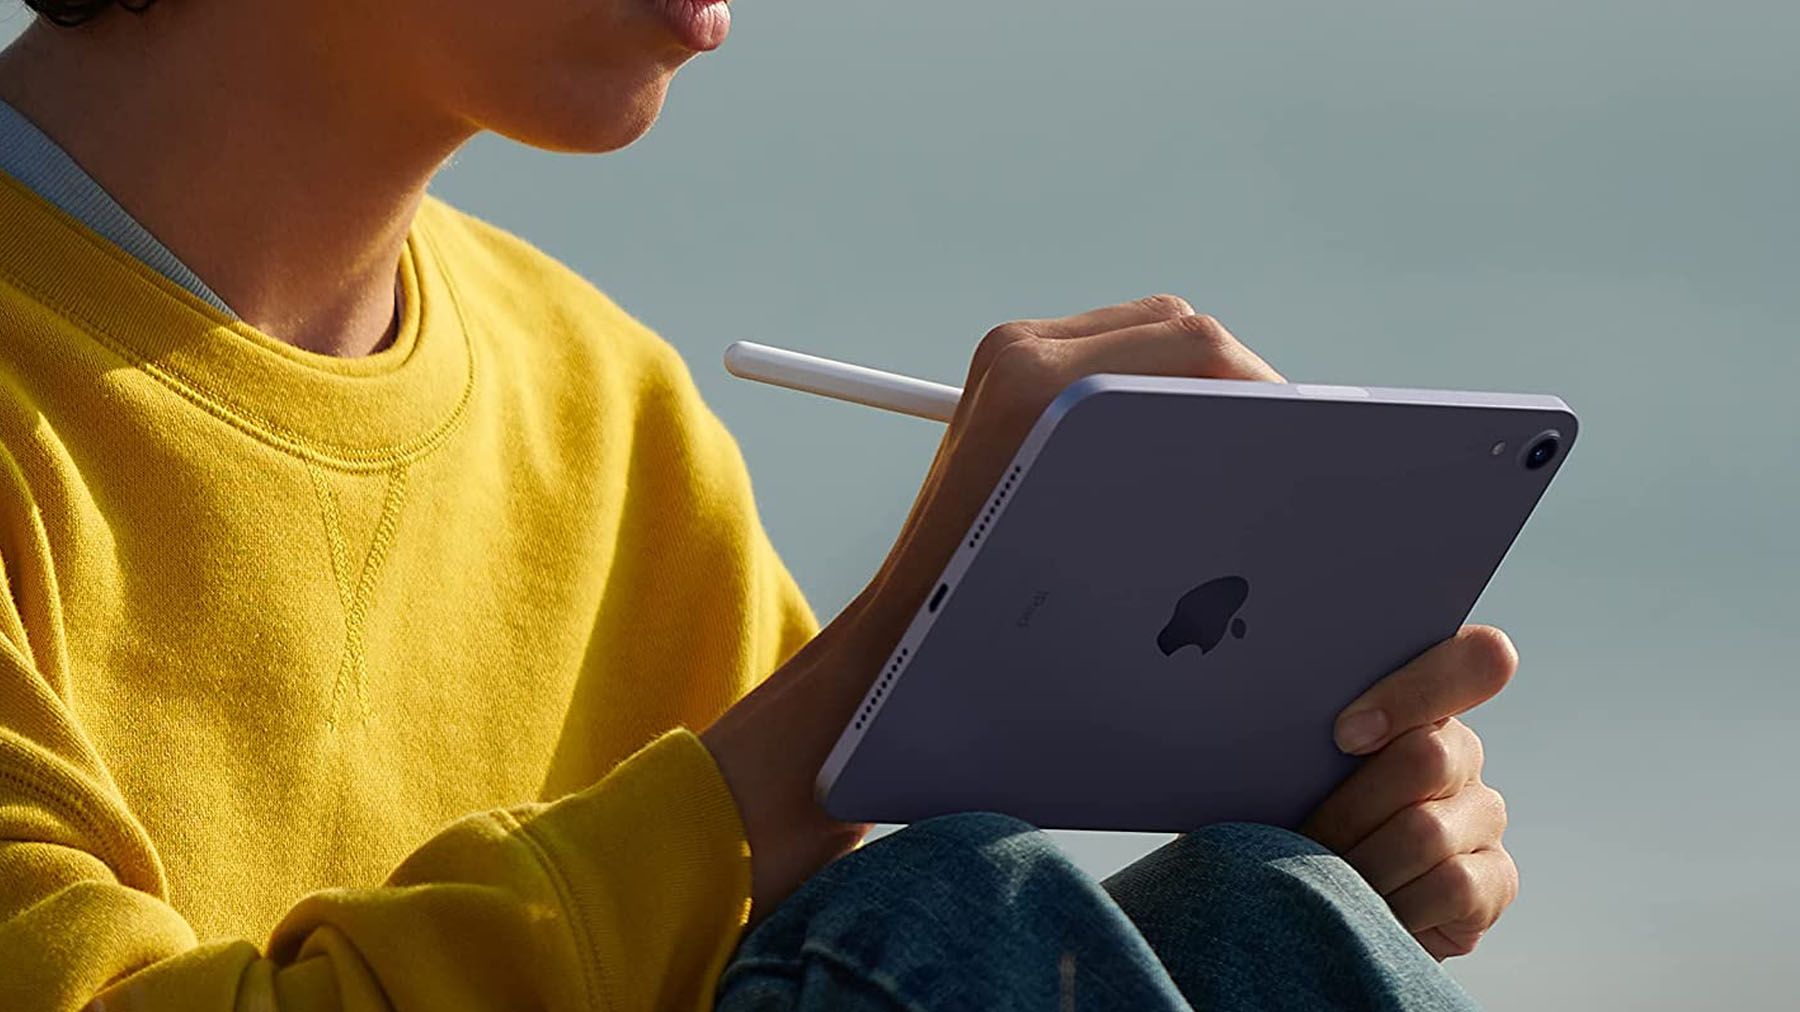 A photo of a person sitting on an iPad Mini while using an Apple Pencil